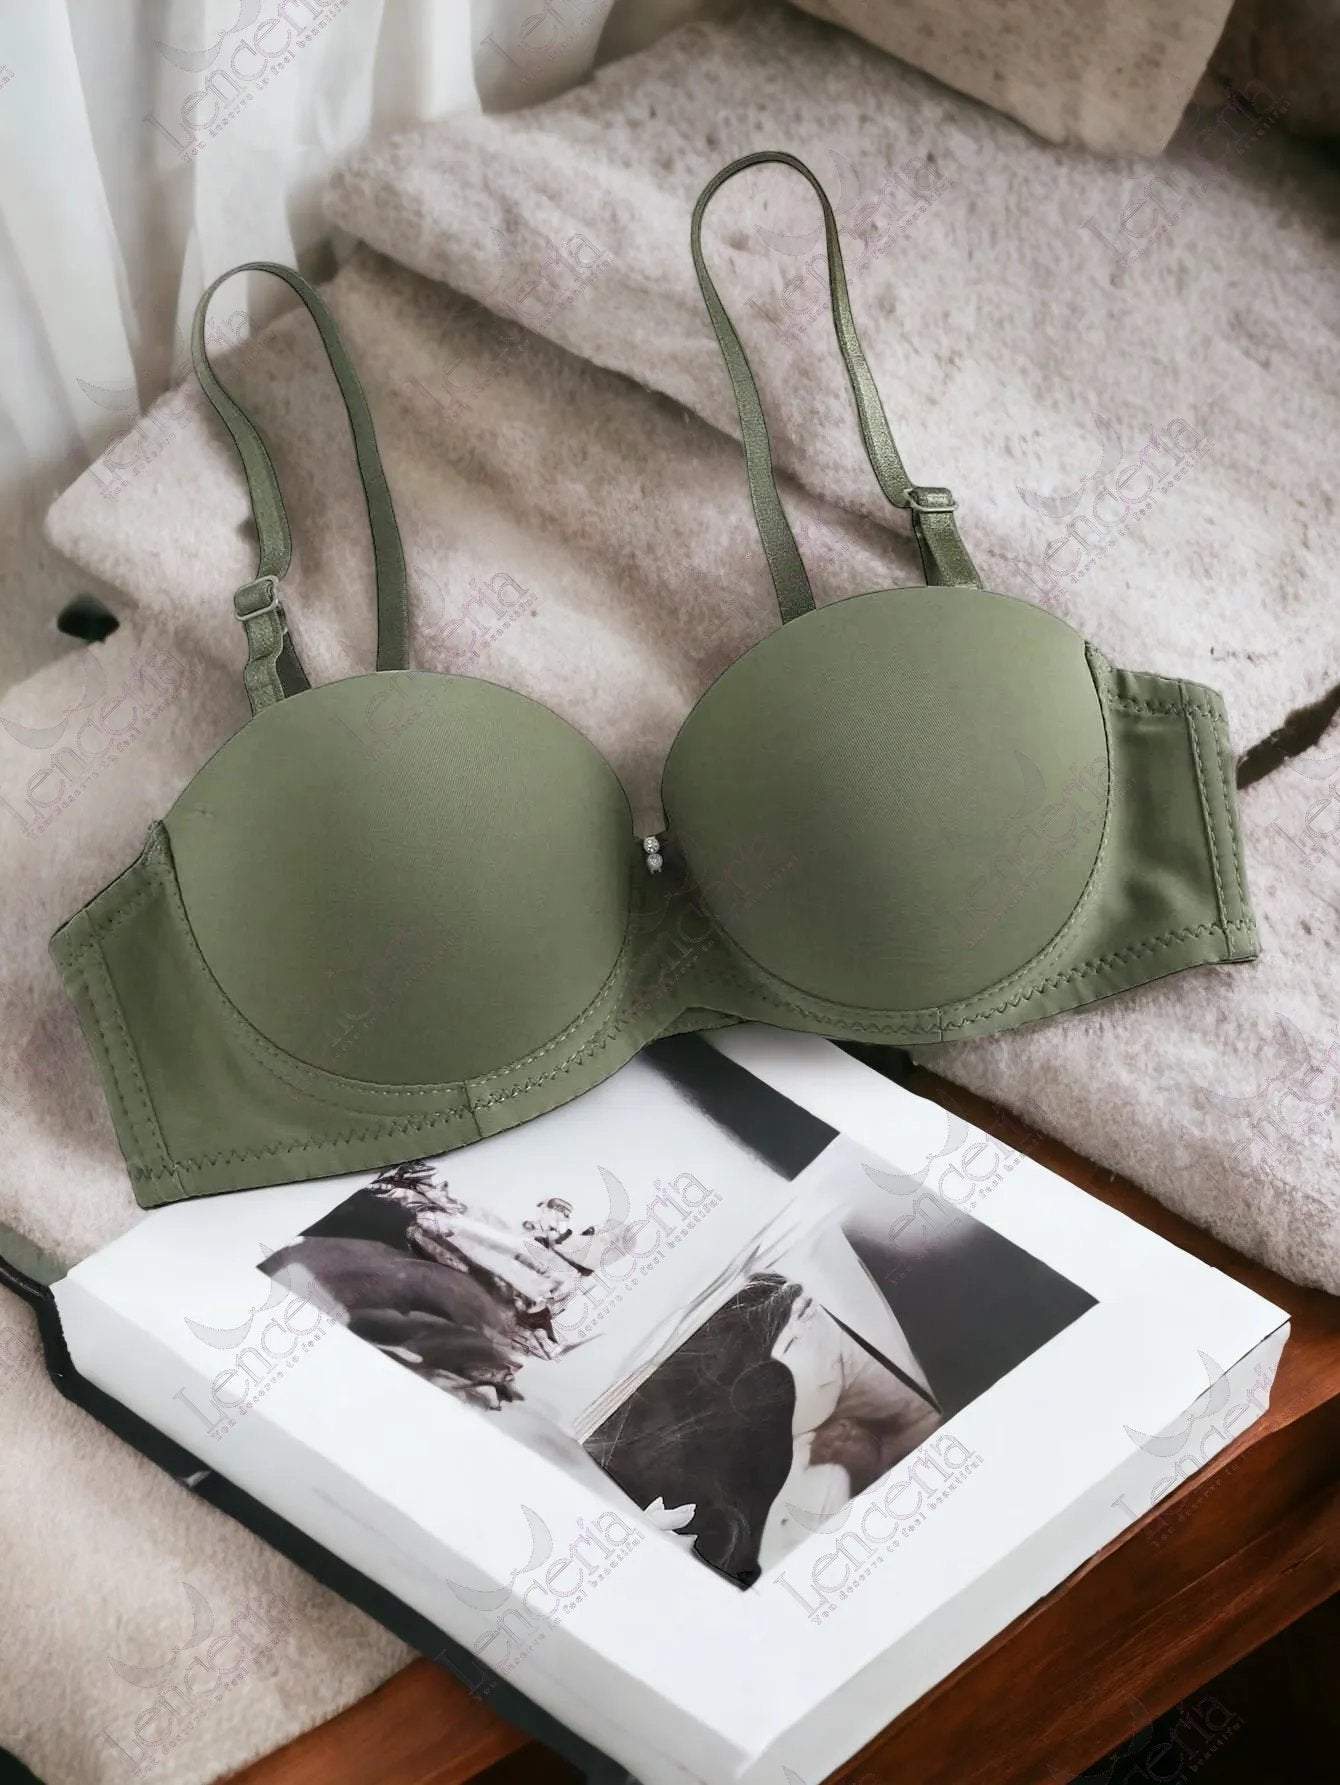 Cheriee everyday essentials adjustable Army Green padded pushup bra - very comfortable (c30)